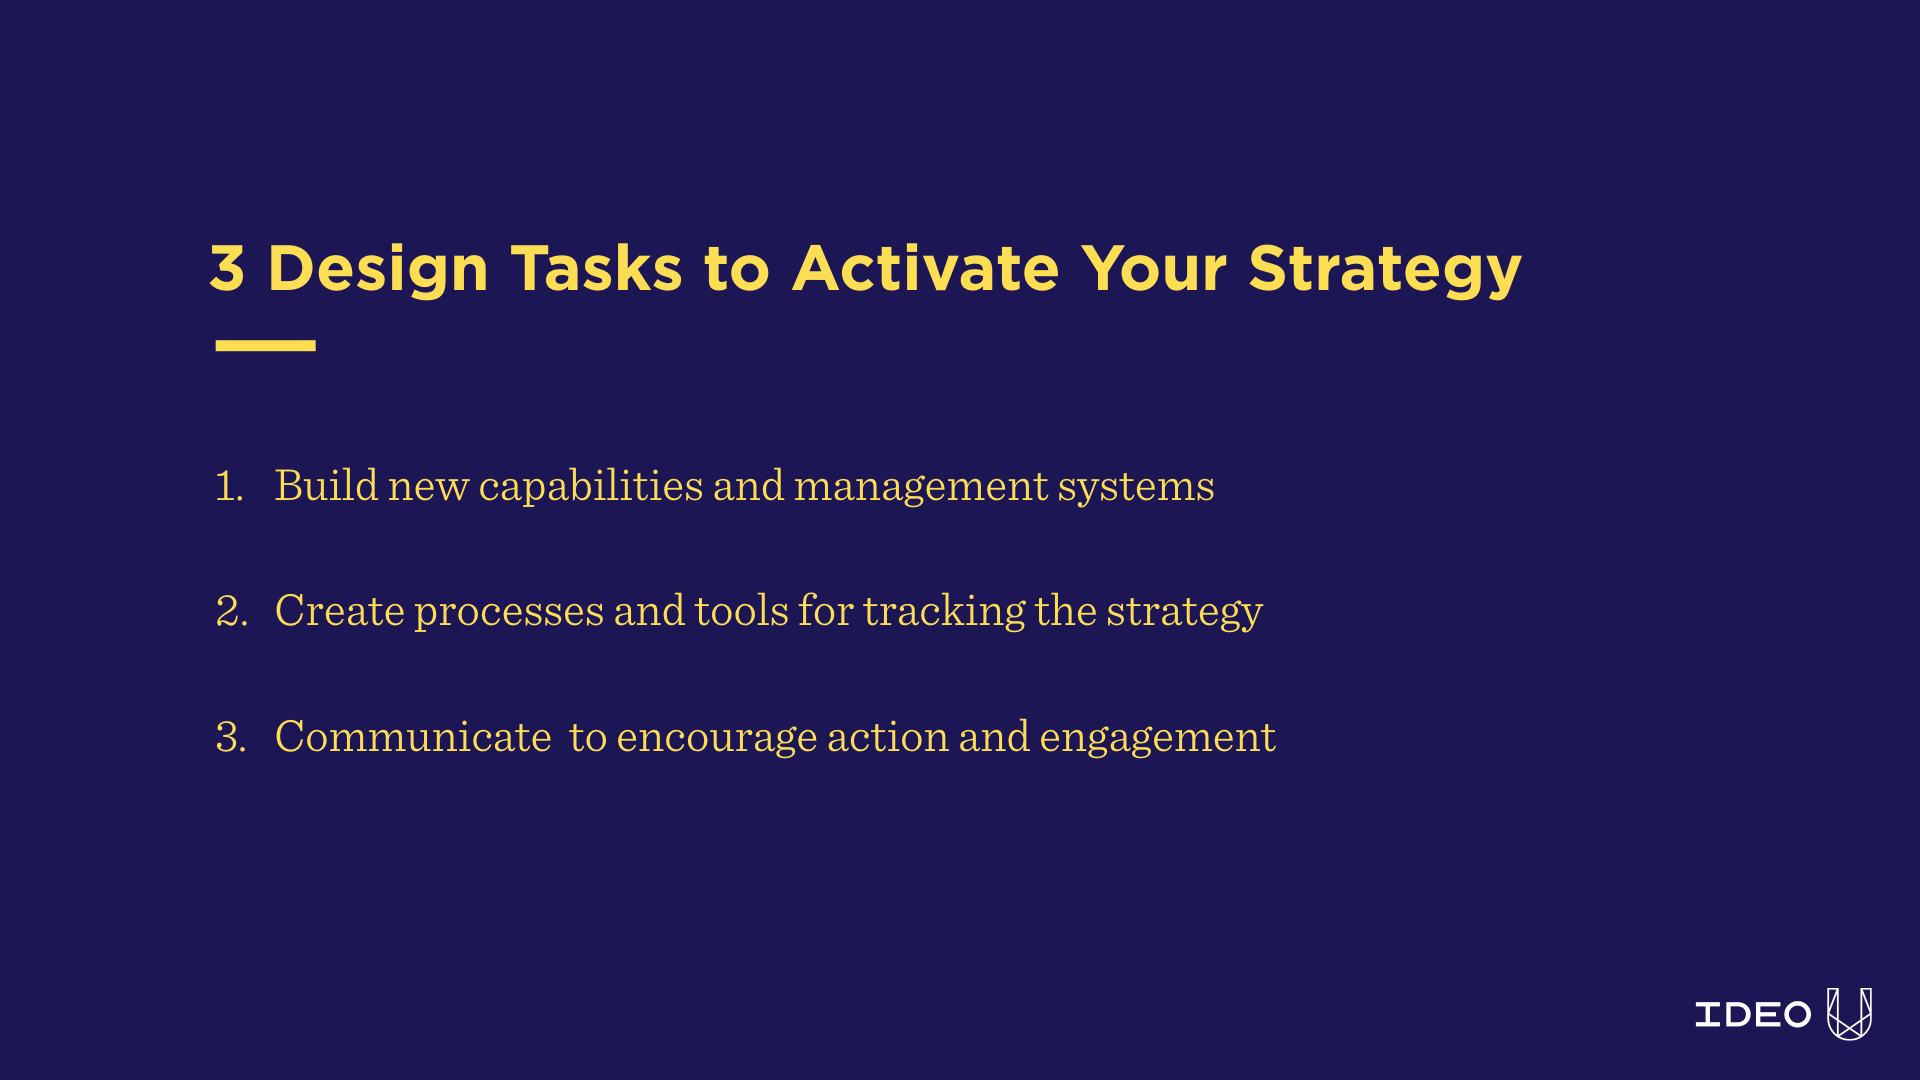 3 Design Tasks to Activate Your Strategy